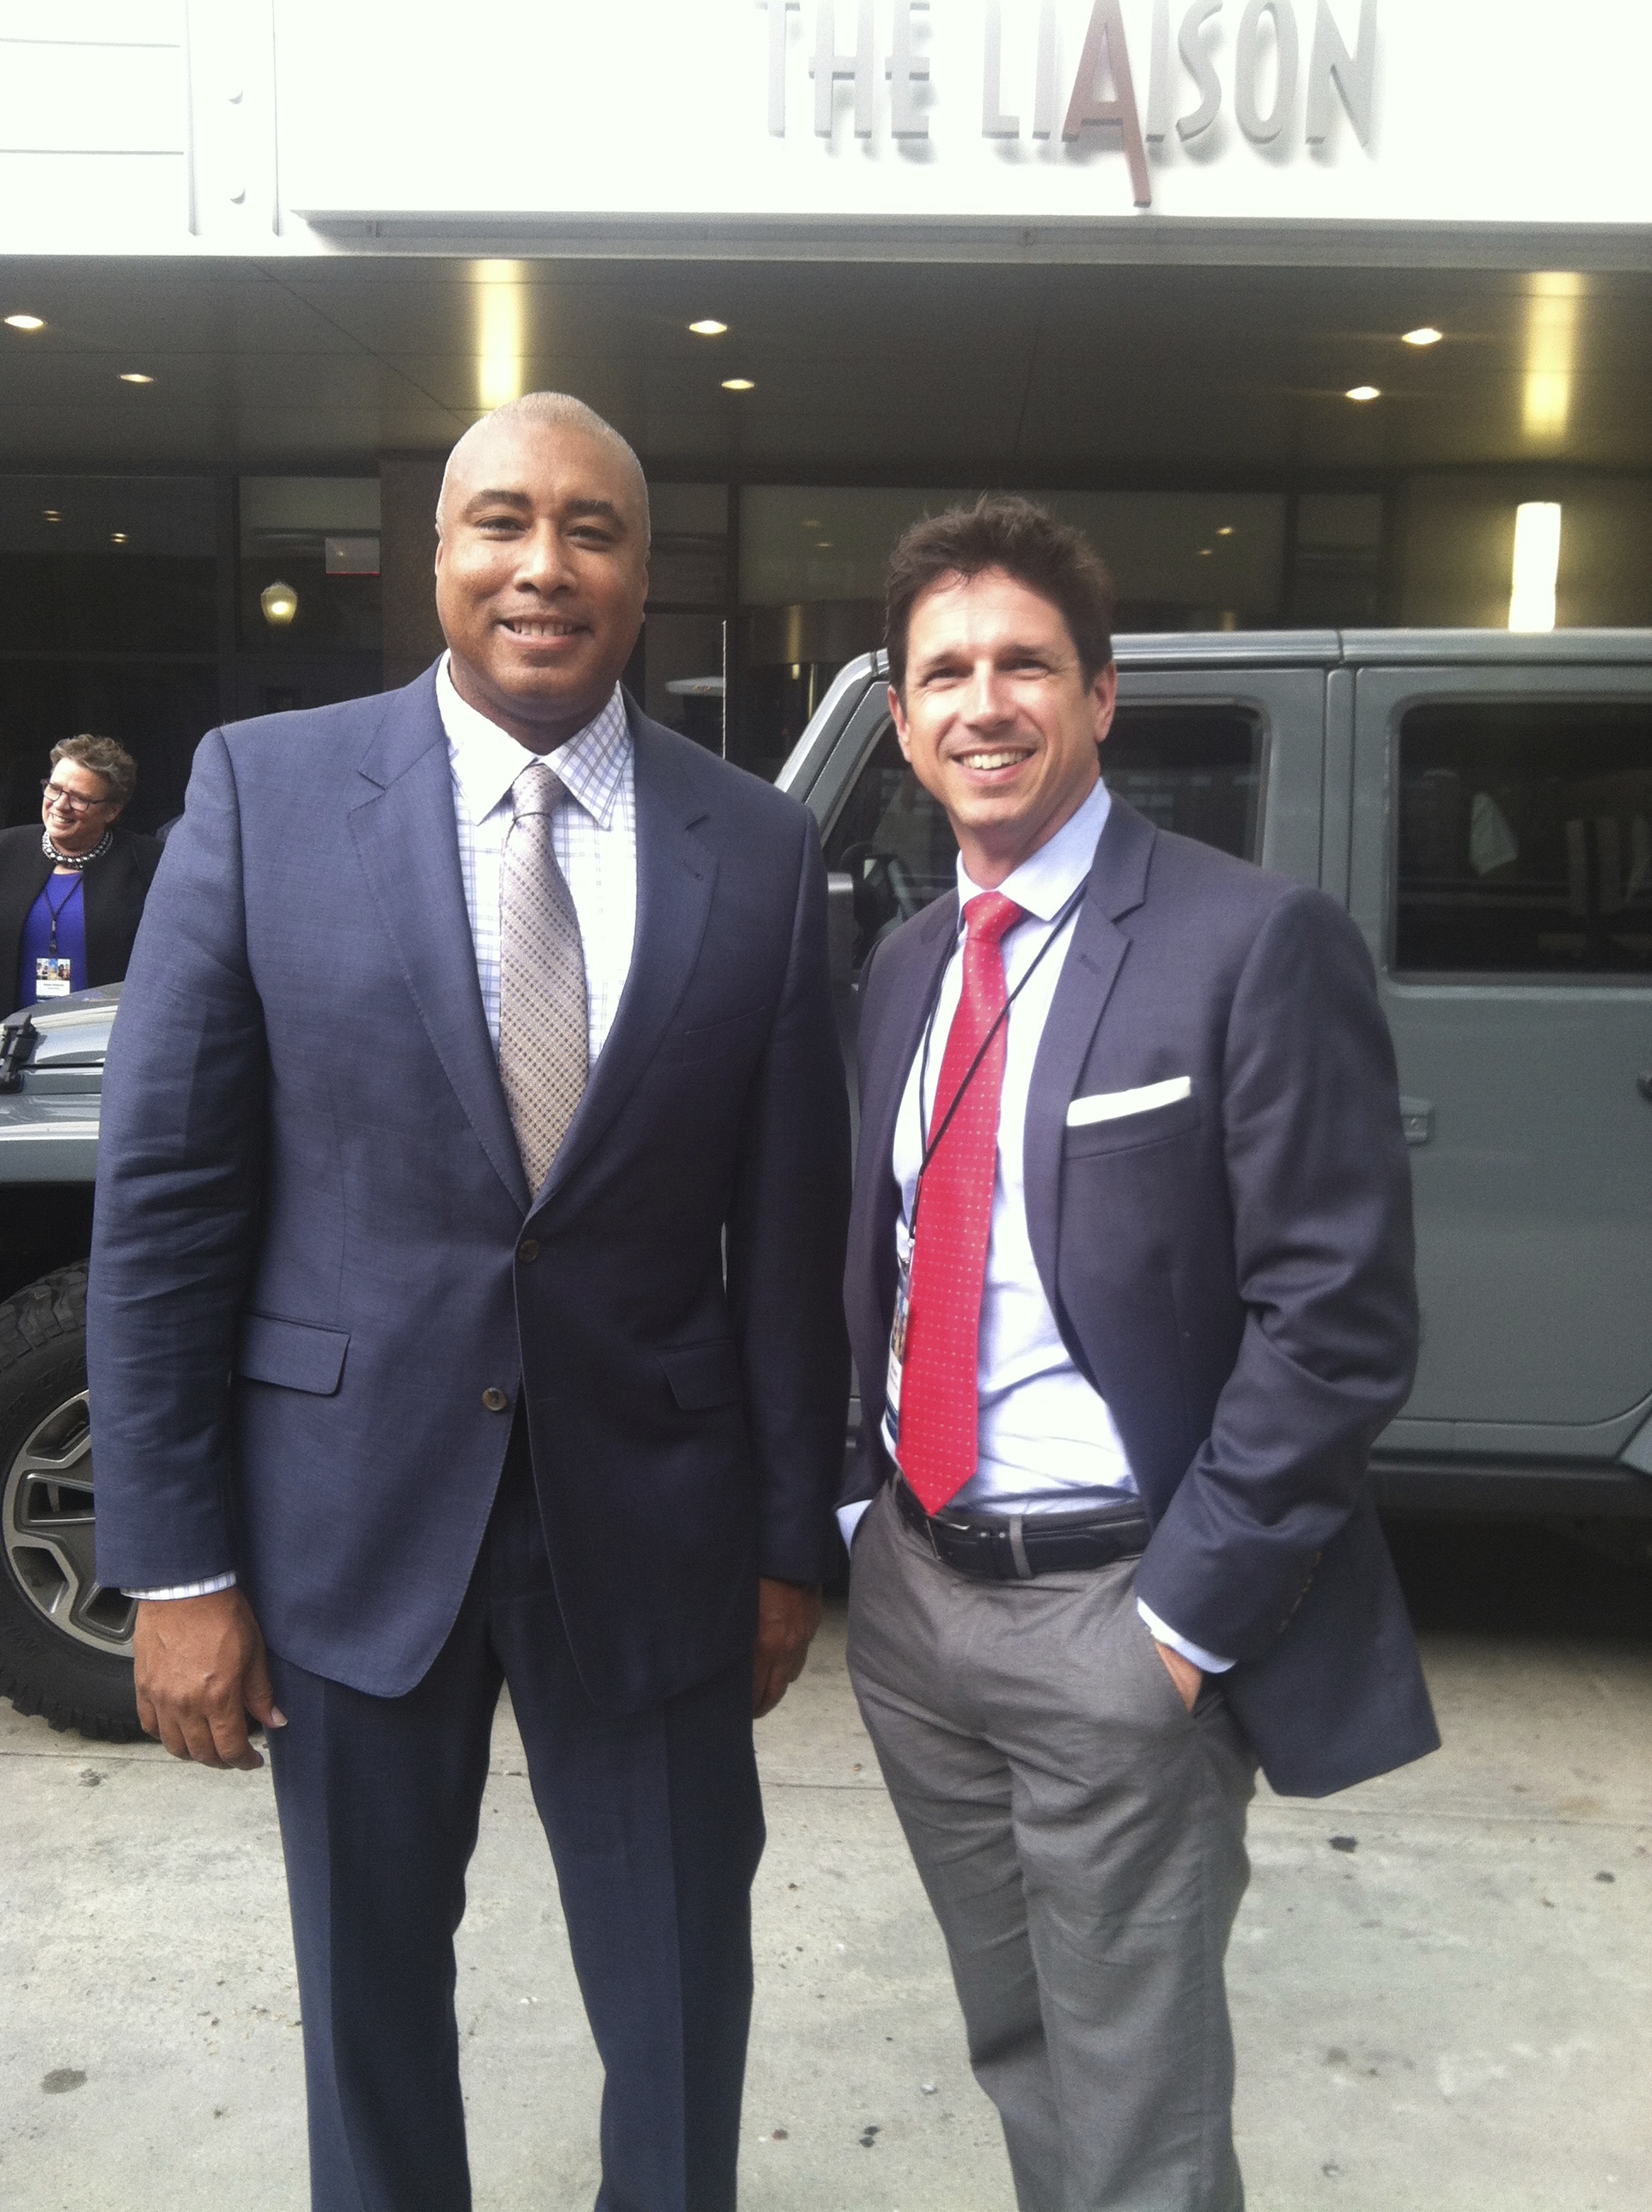 Former NY Yankees and Hall of Fame inductee Bernie Williams and Billy Cuthrell between meetings in D.C.